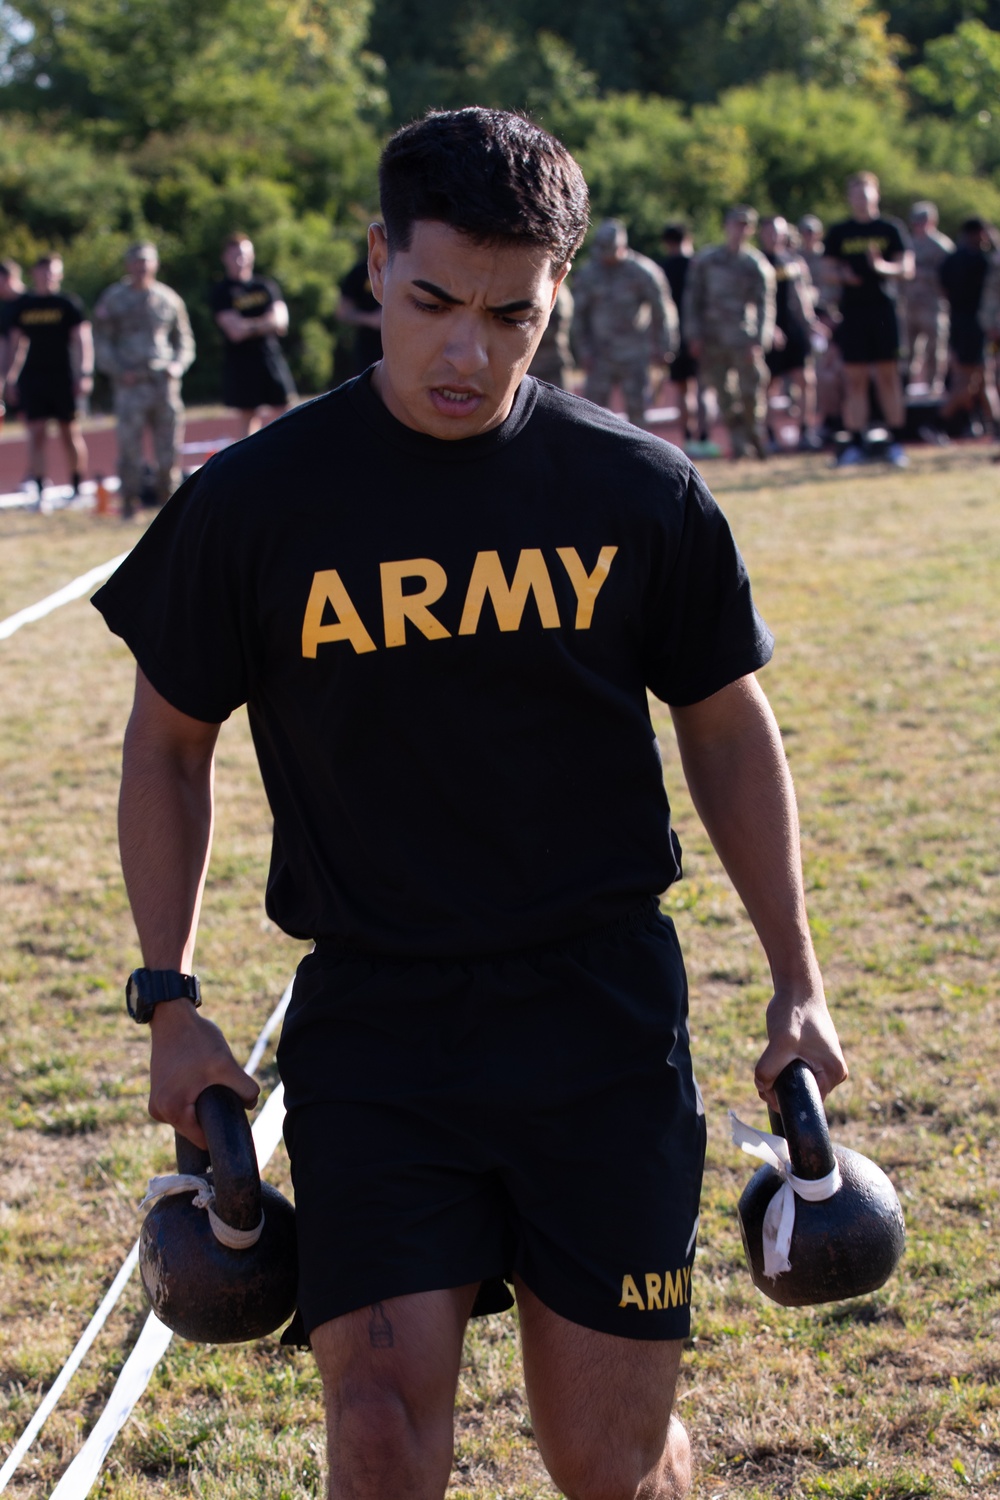 DVIDS - Images - U.S. Army Soldier carries kettle bells in ACFT [Image ...